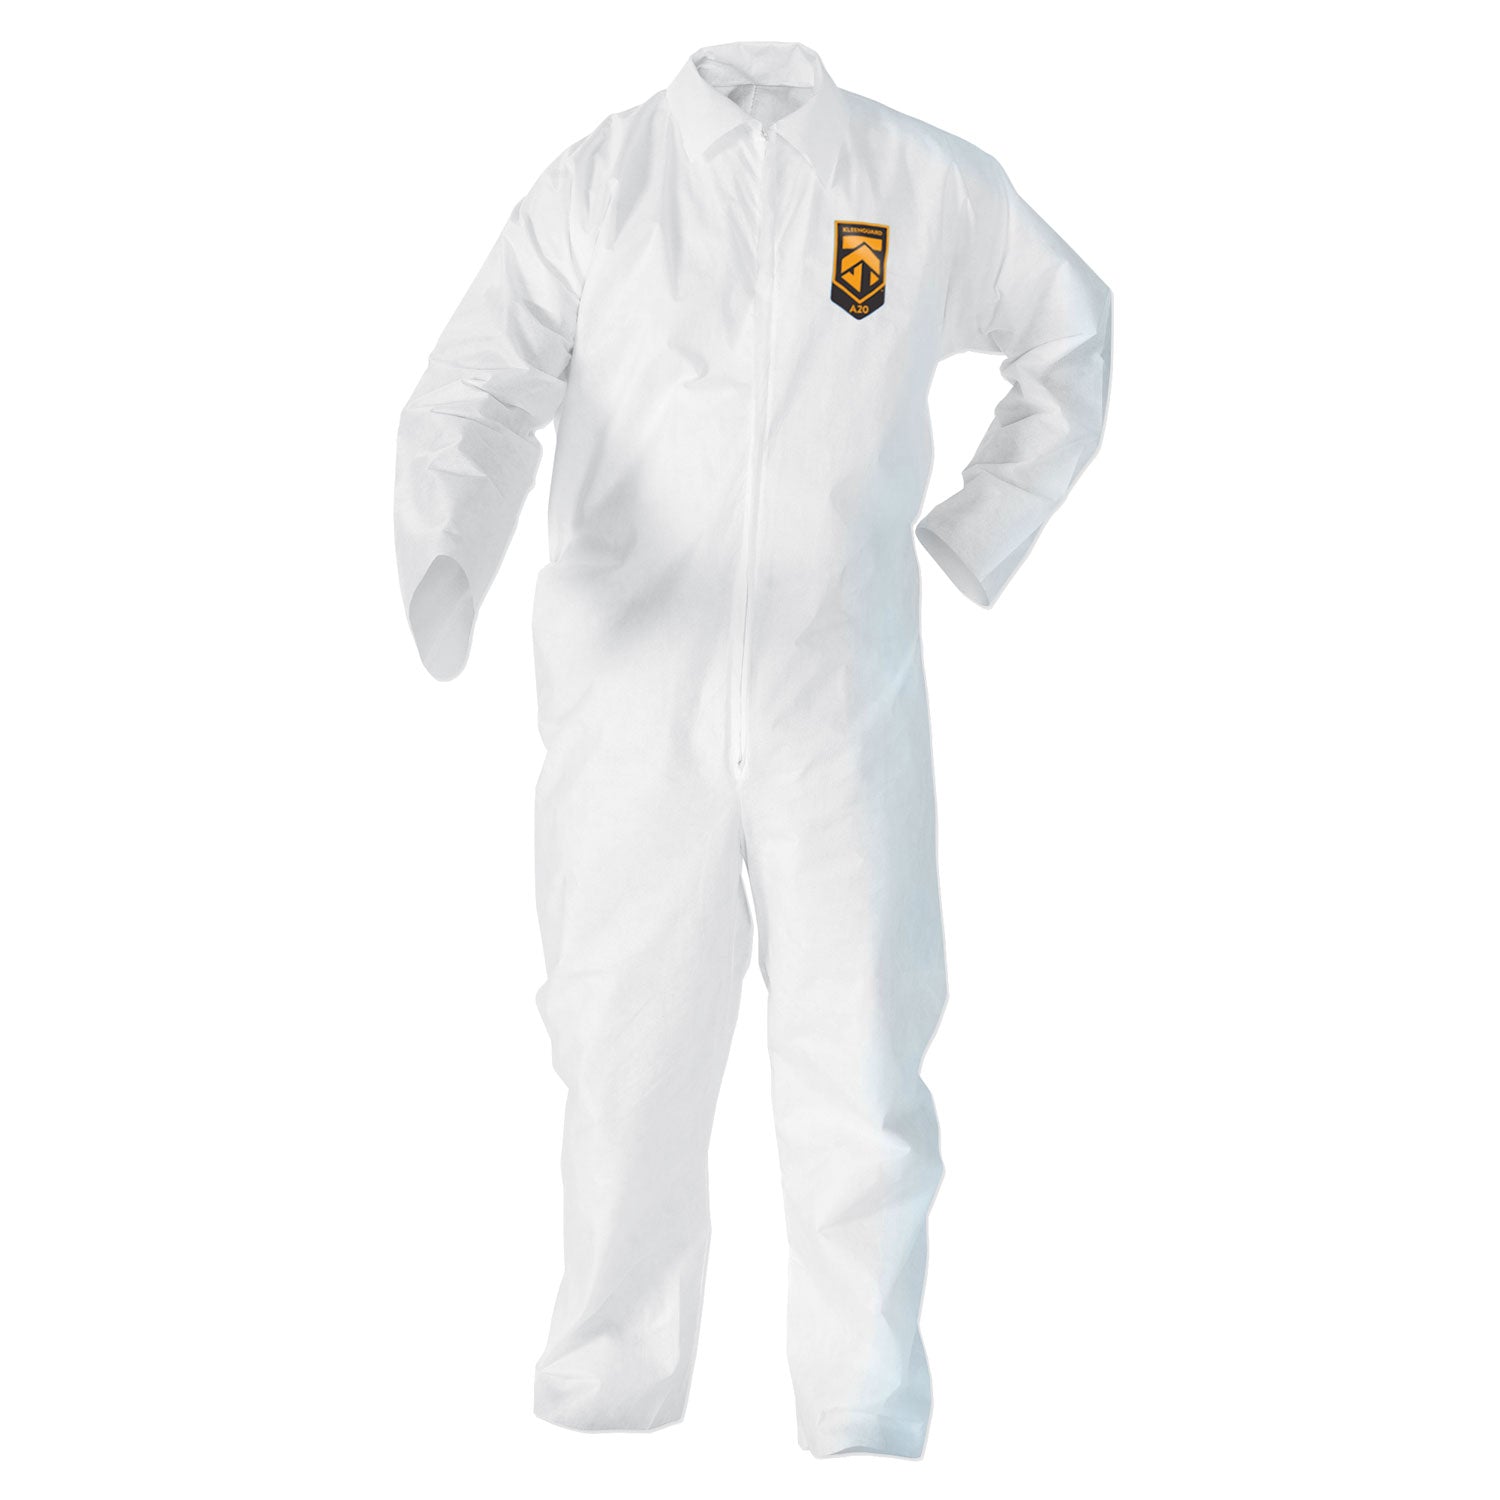 a20-breathable-particle-protection-coveralls-3x-large-white-20-carton_kcc49006 - 1